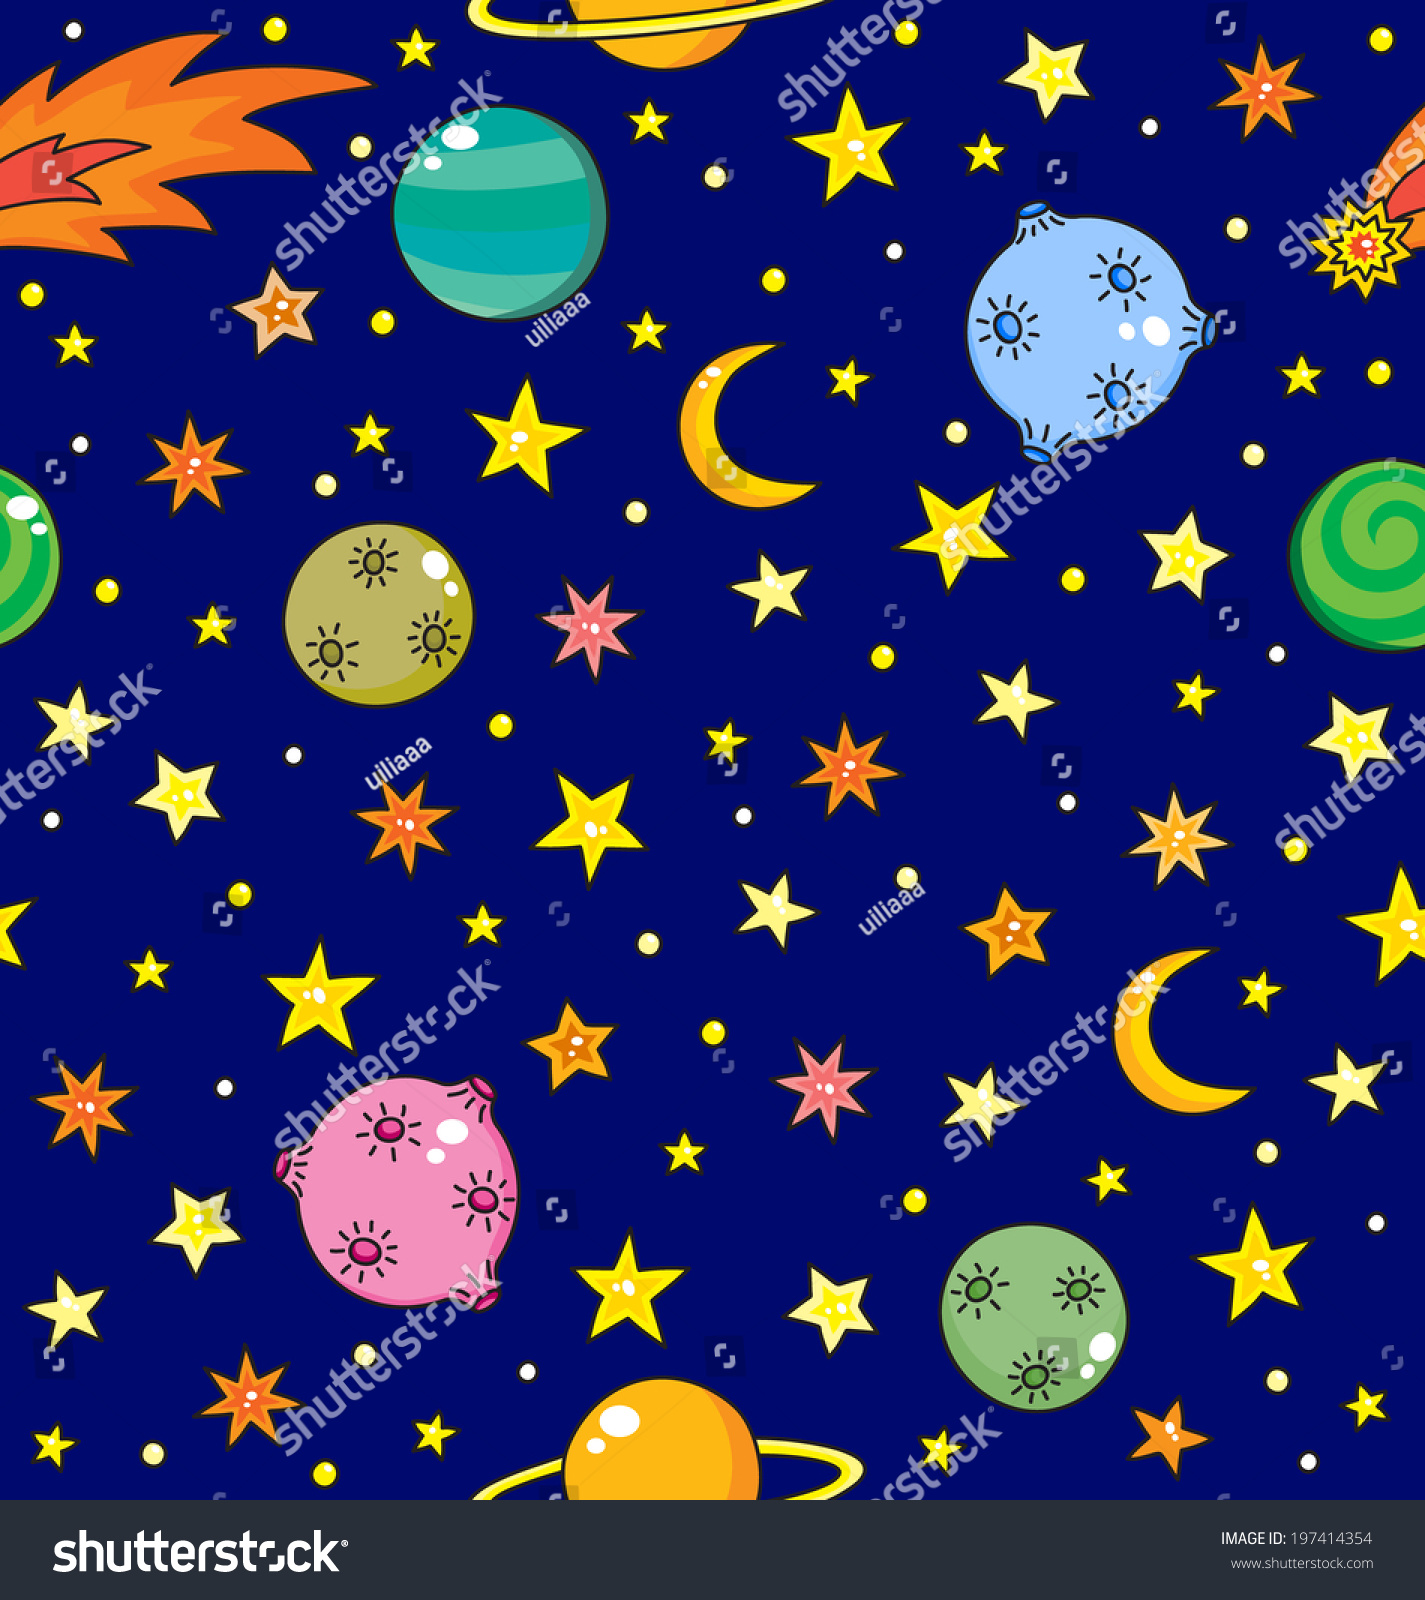 space clipart background - photo #23